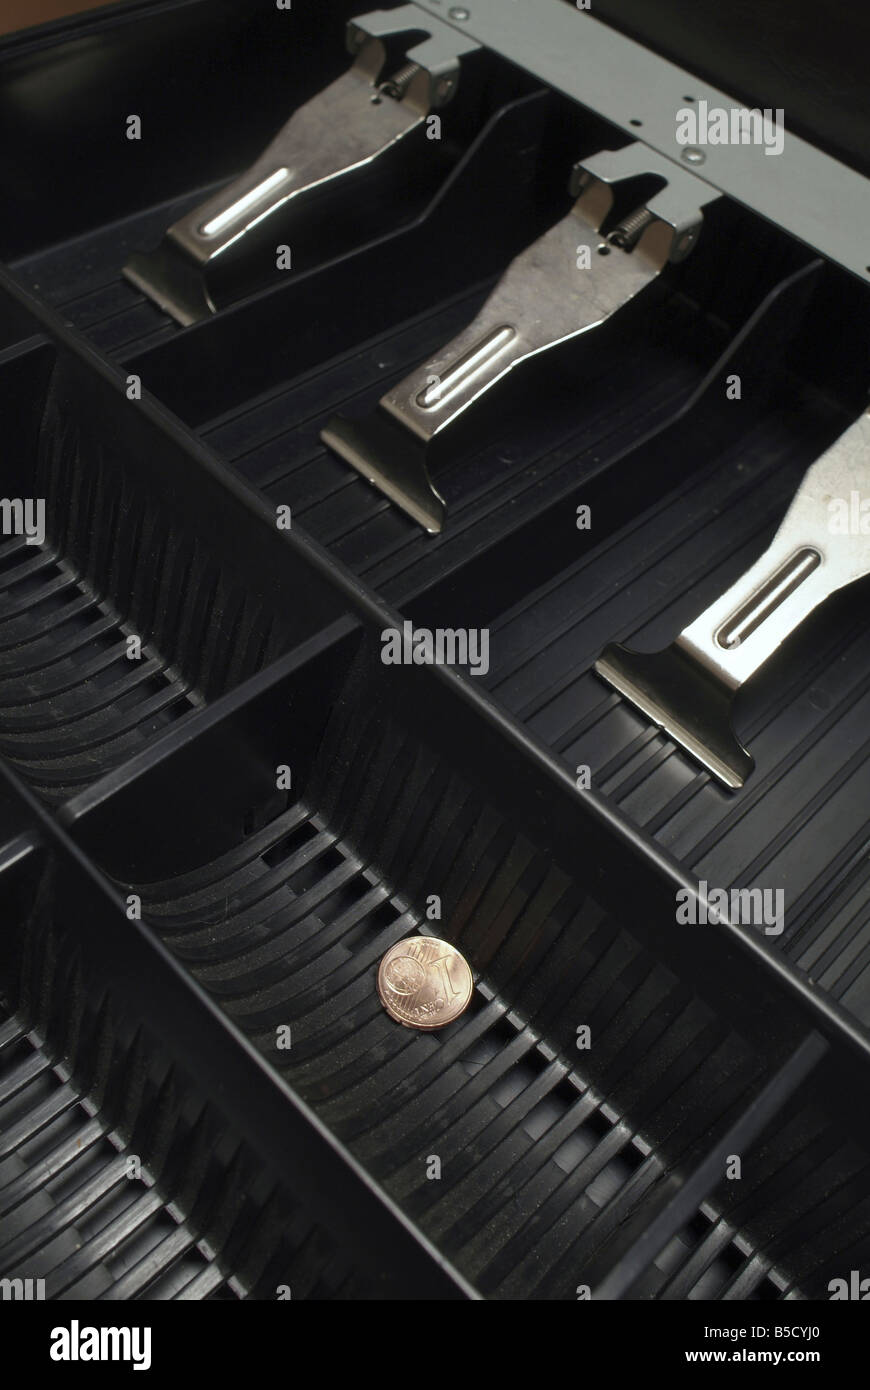 Cash register with one Euro cent coin Stock Photo